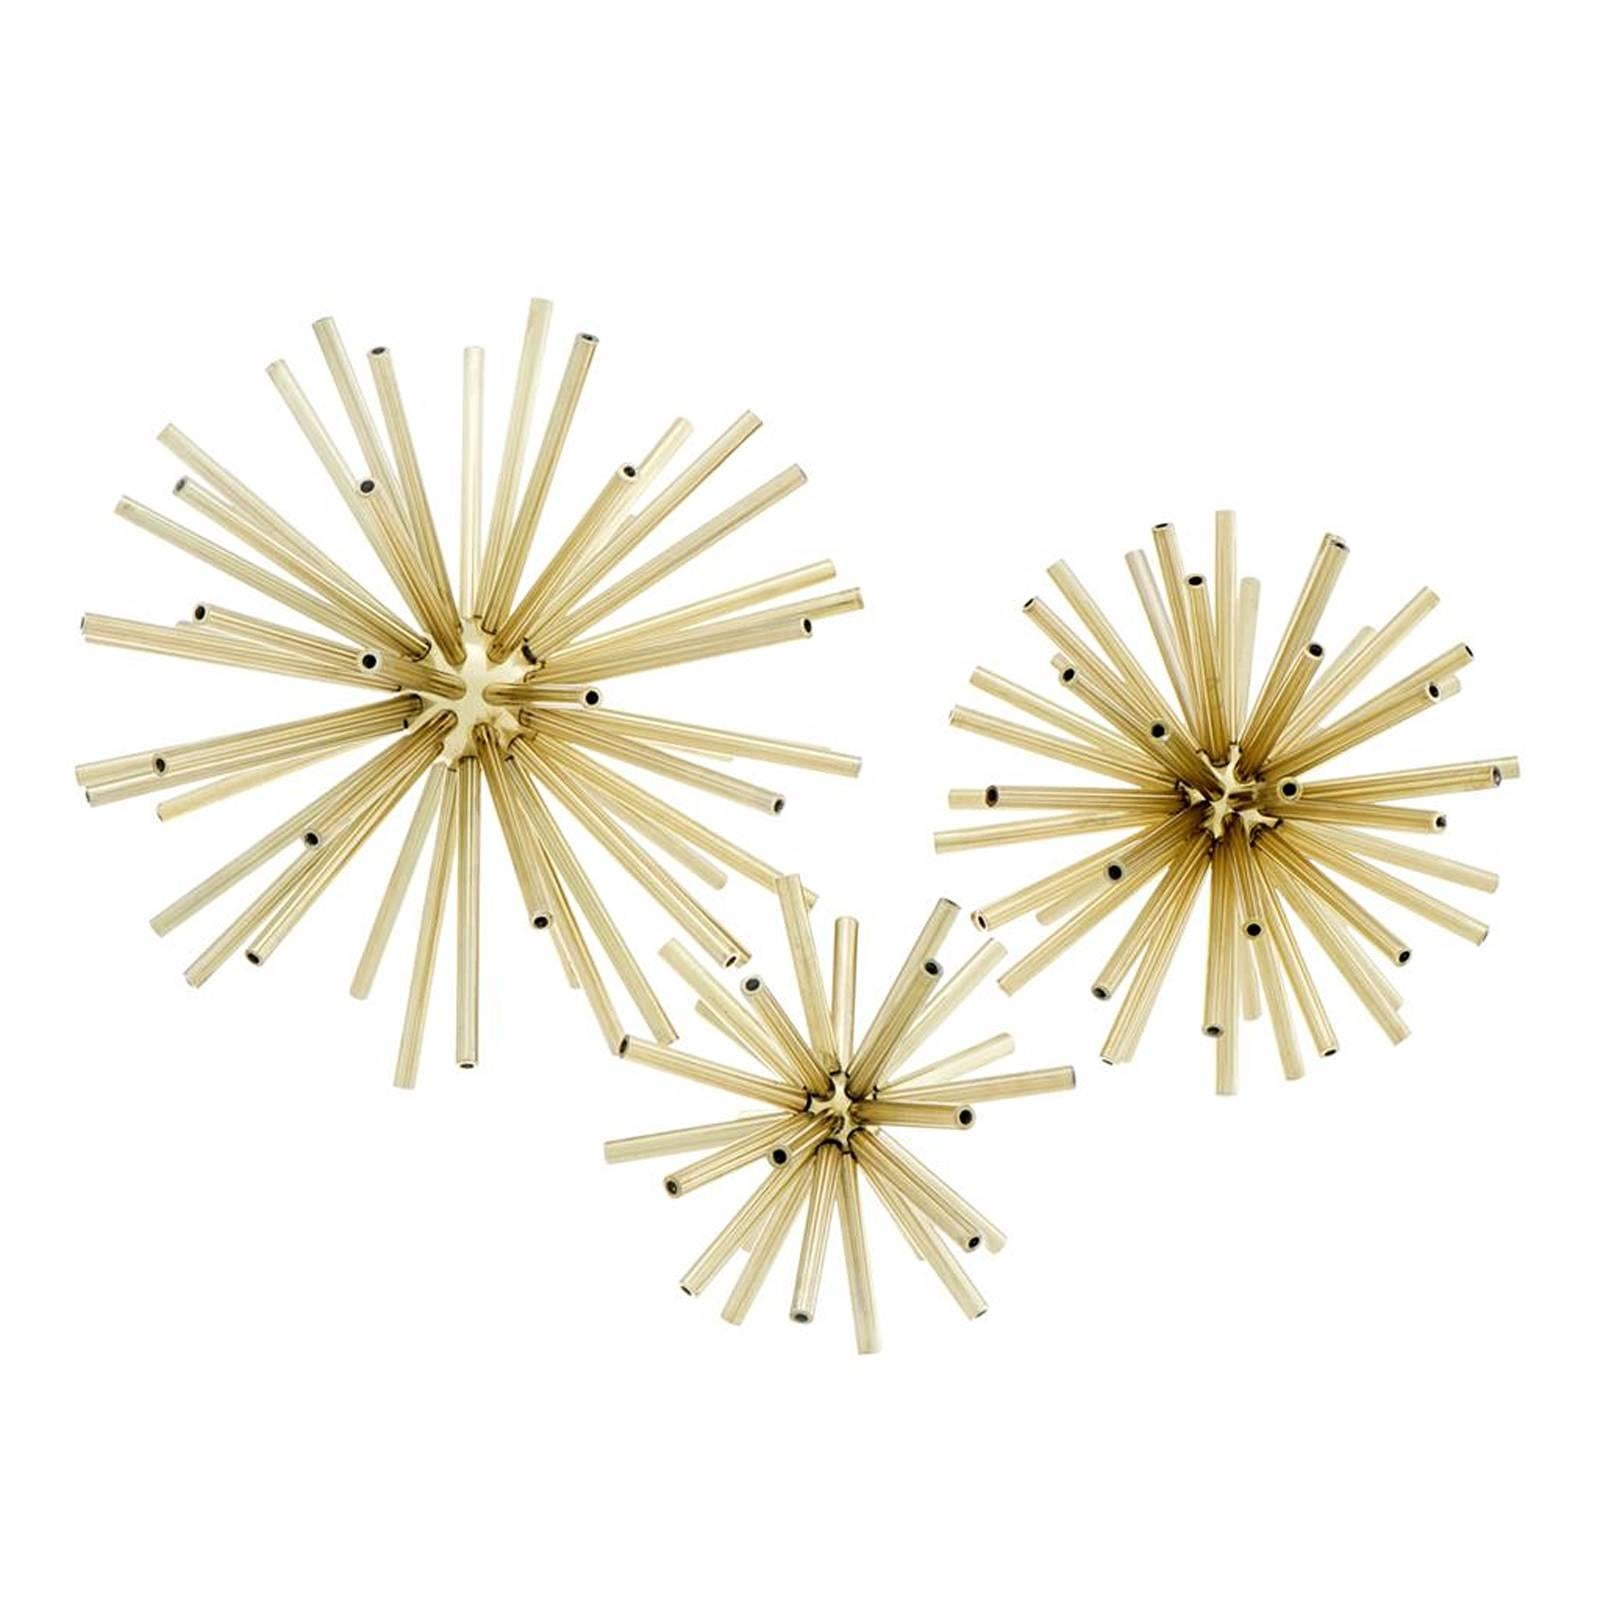 Space Decoration Objects Set of Three in Gold Finish